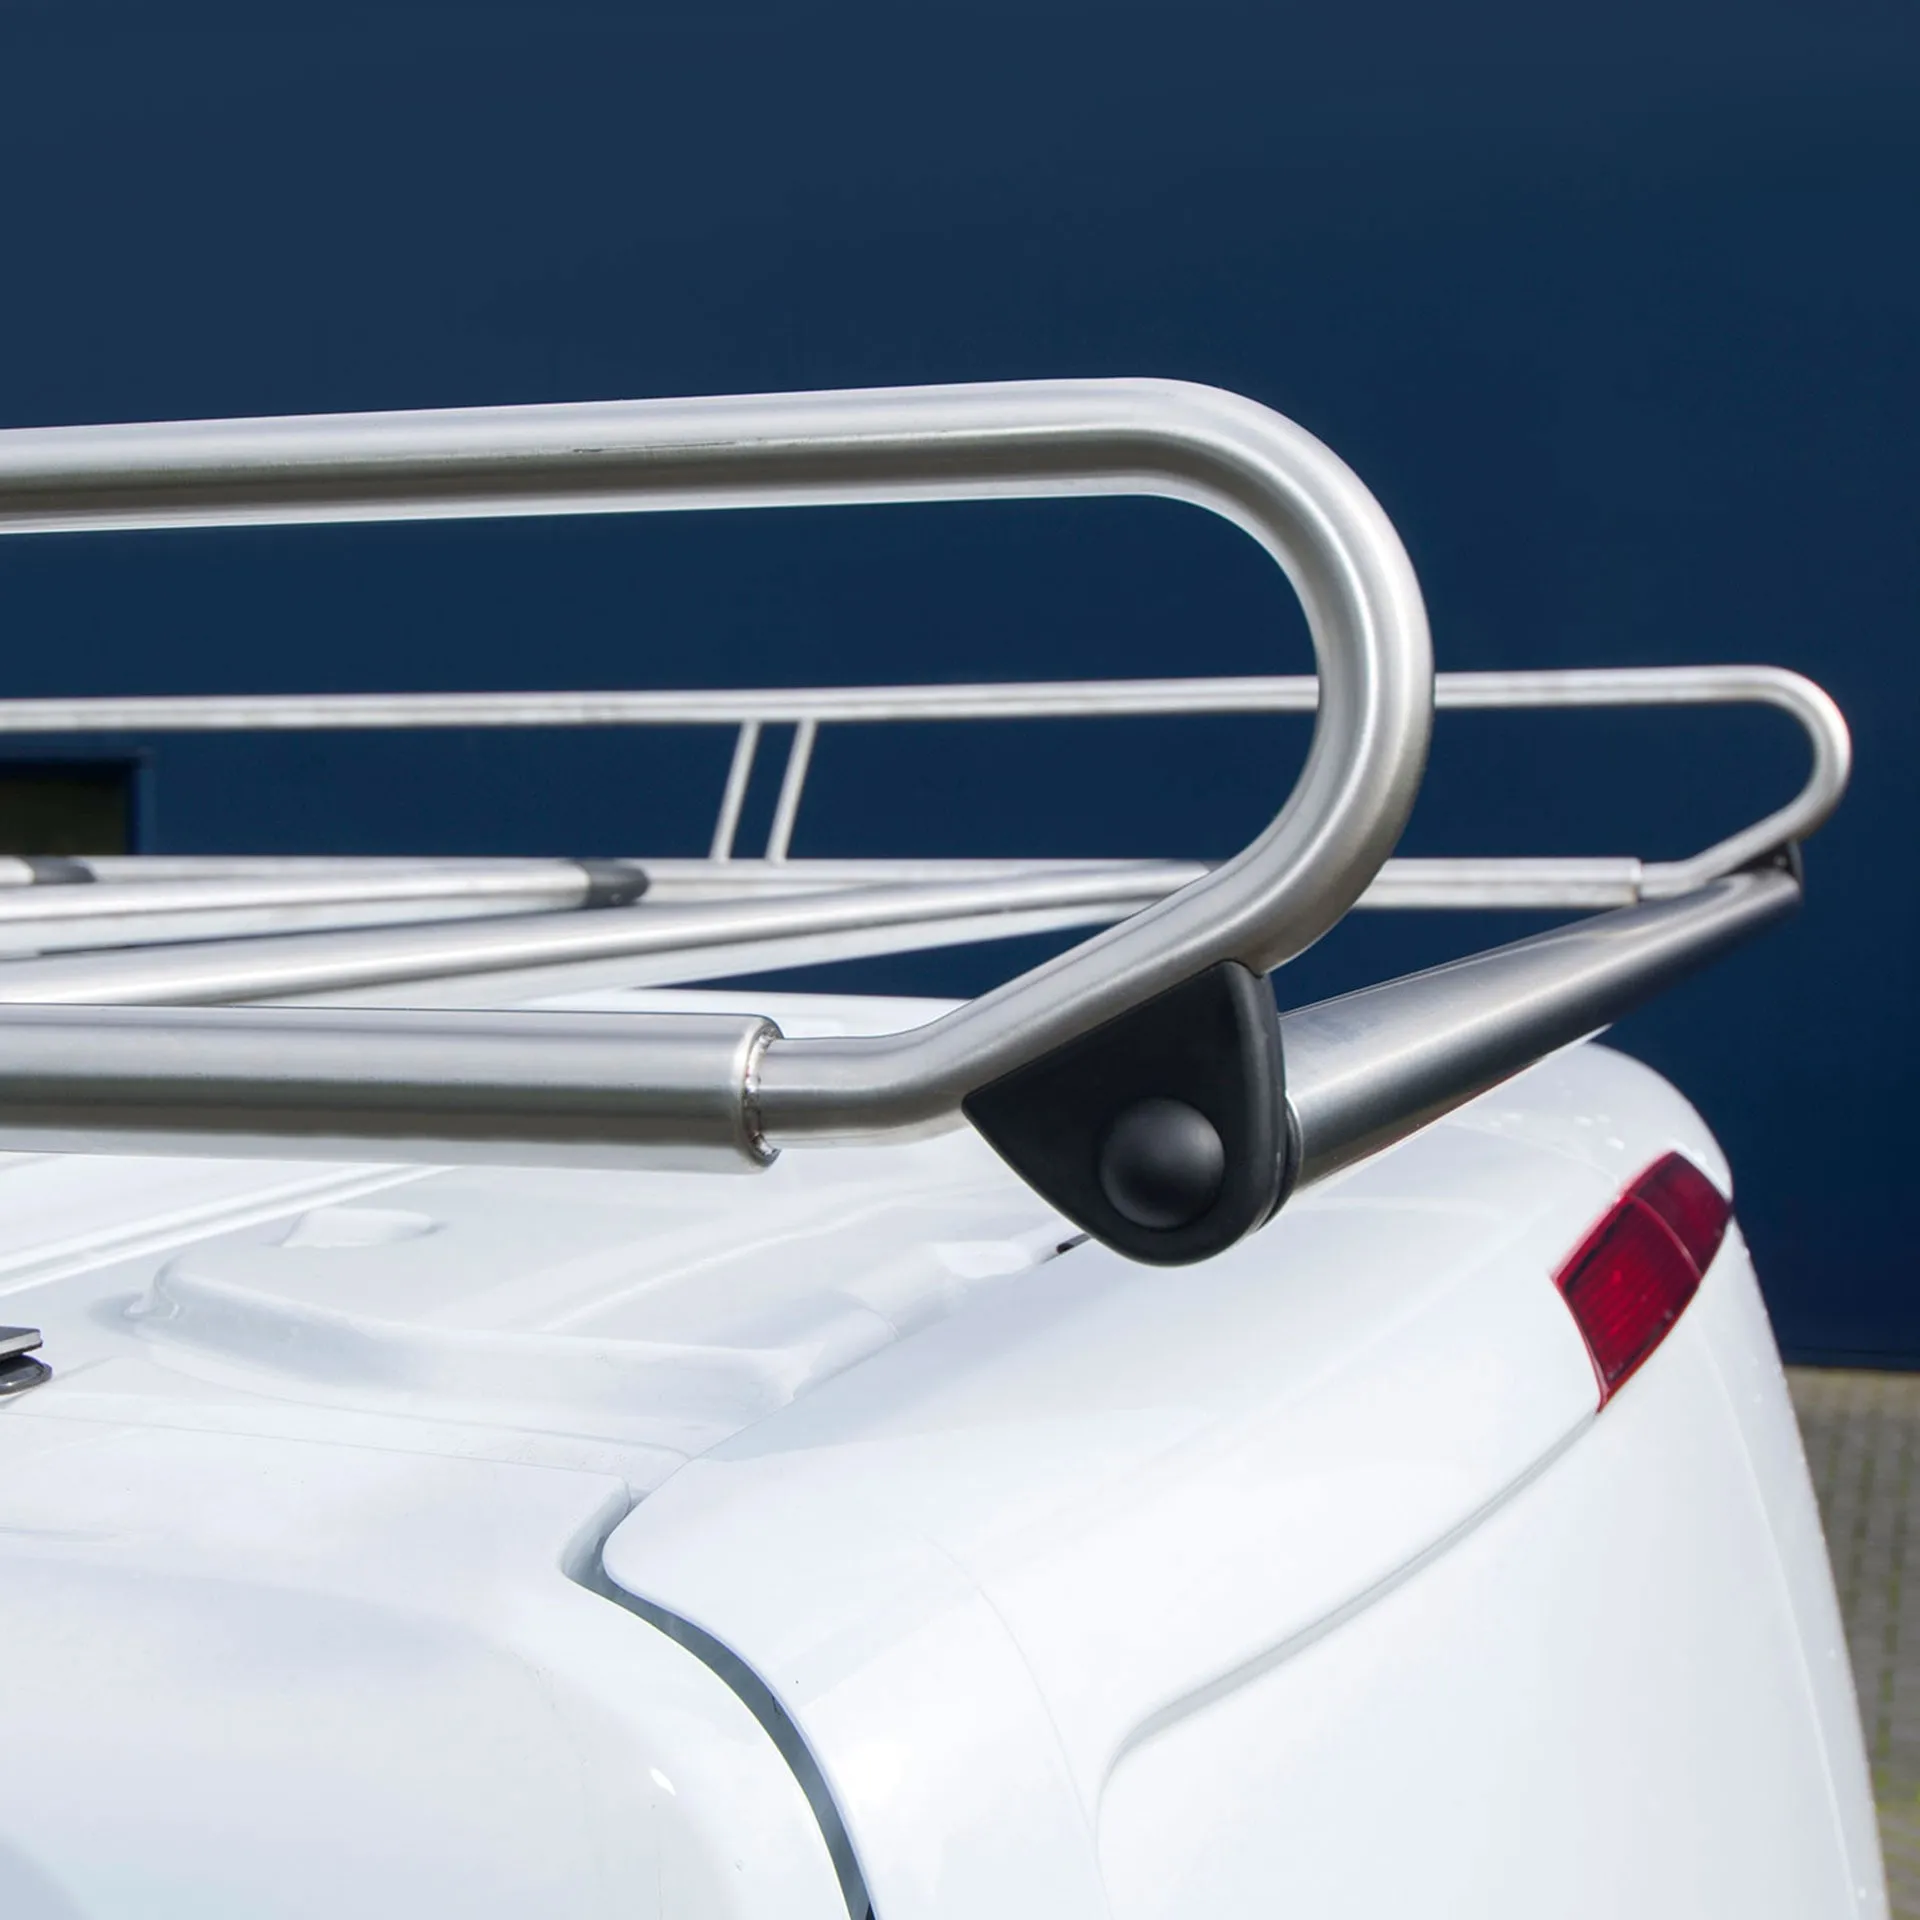 Auto Roof Carrier made of stainless steel, loading roller, high load capacity, low dead weight. Serie CVA Mounted Roof Cargo Carrier by AlphaDynamik